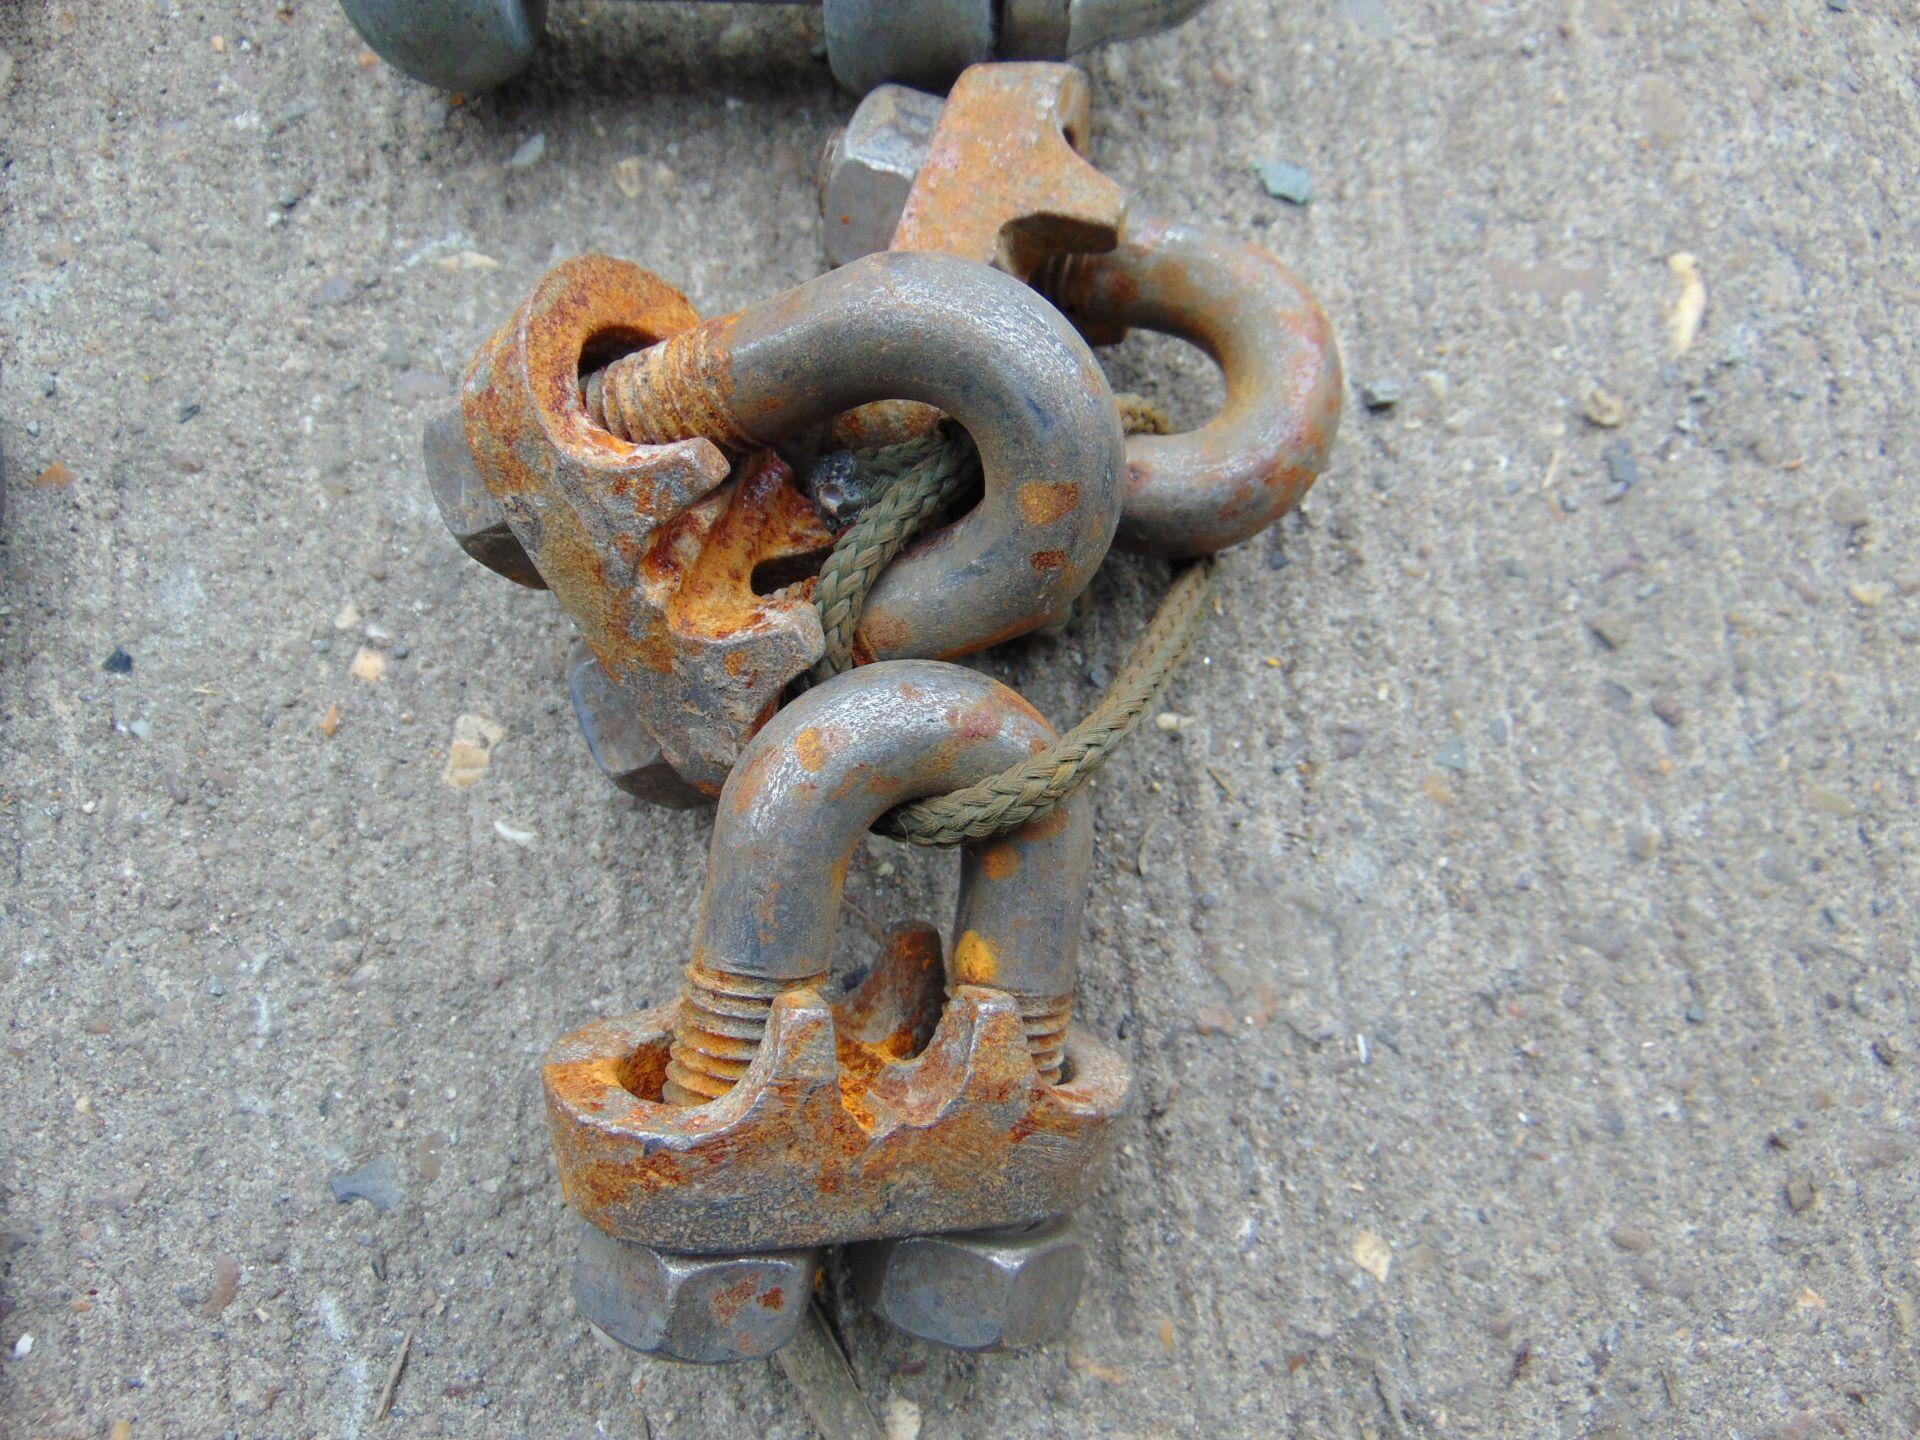 15 x M10 0.23t EYEBOLTS, 3 x WIRE ROPE CLAMPS, 30CWT D SHACKLE AND A BOX OF M10 x 30mm BOLTS - Image 4 of 6